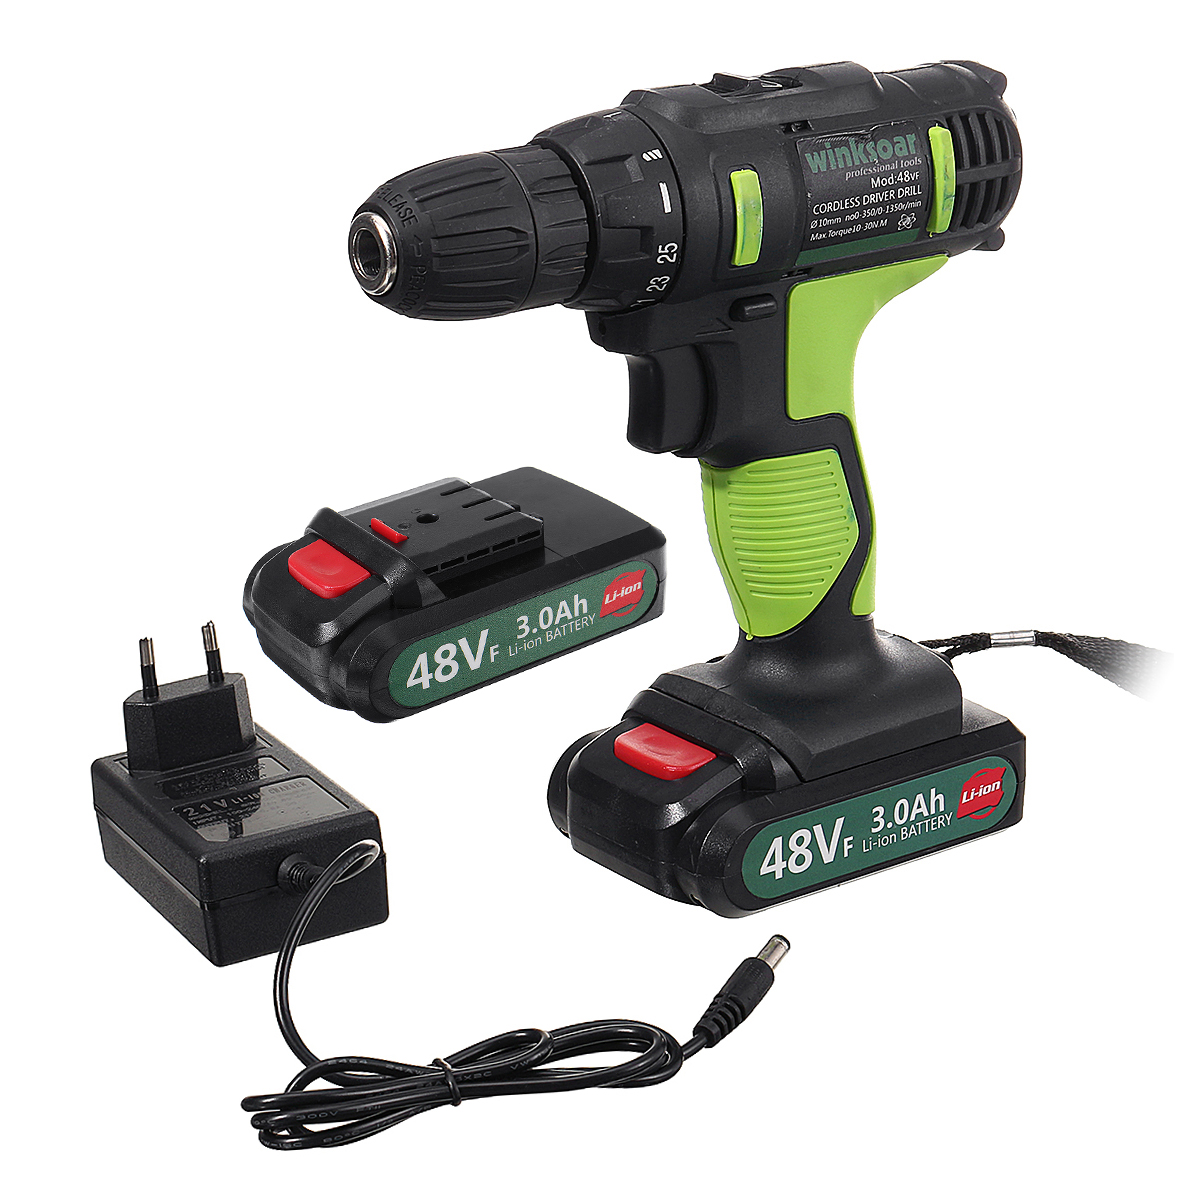 48VF-Cordless-Impact-Lithium-Electric-Drill-2-Speed-Electric-Hand-Drill-LED-lighting-12Pcs-Large-Cap-1555381-7